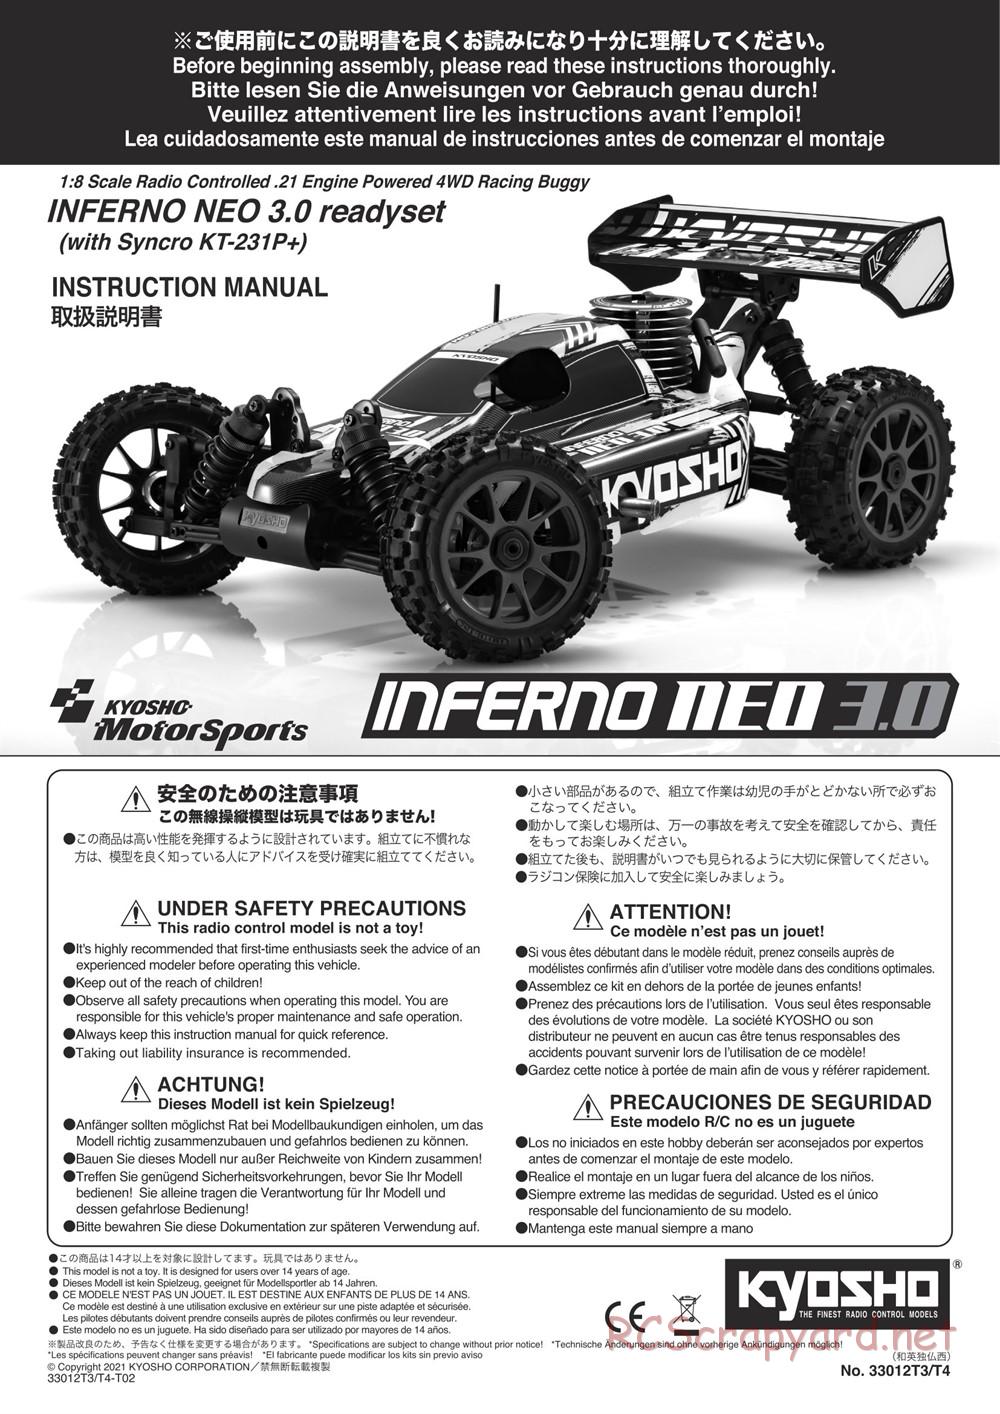 Kyosho - Inferno Neo 3.0 - Manual - Page 1